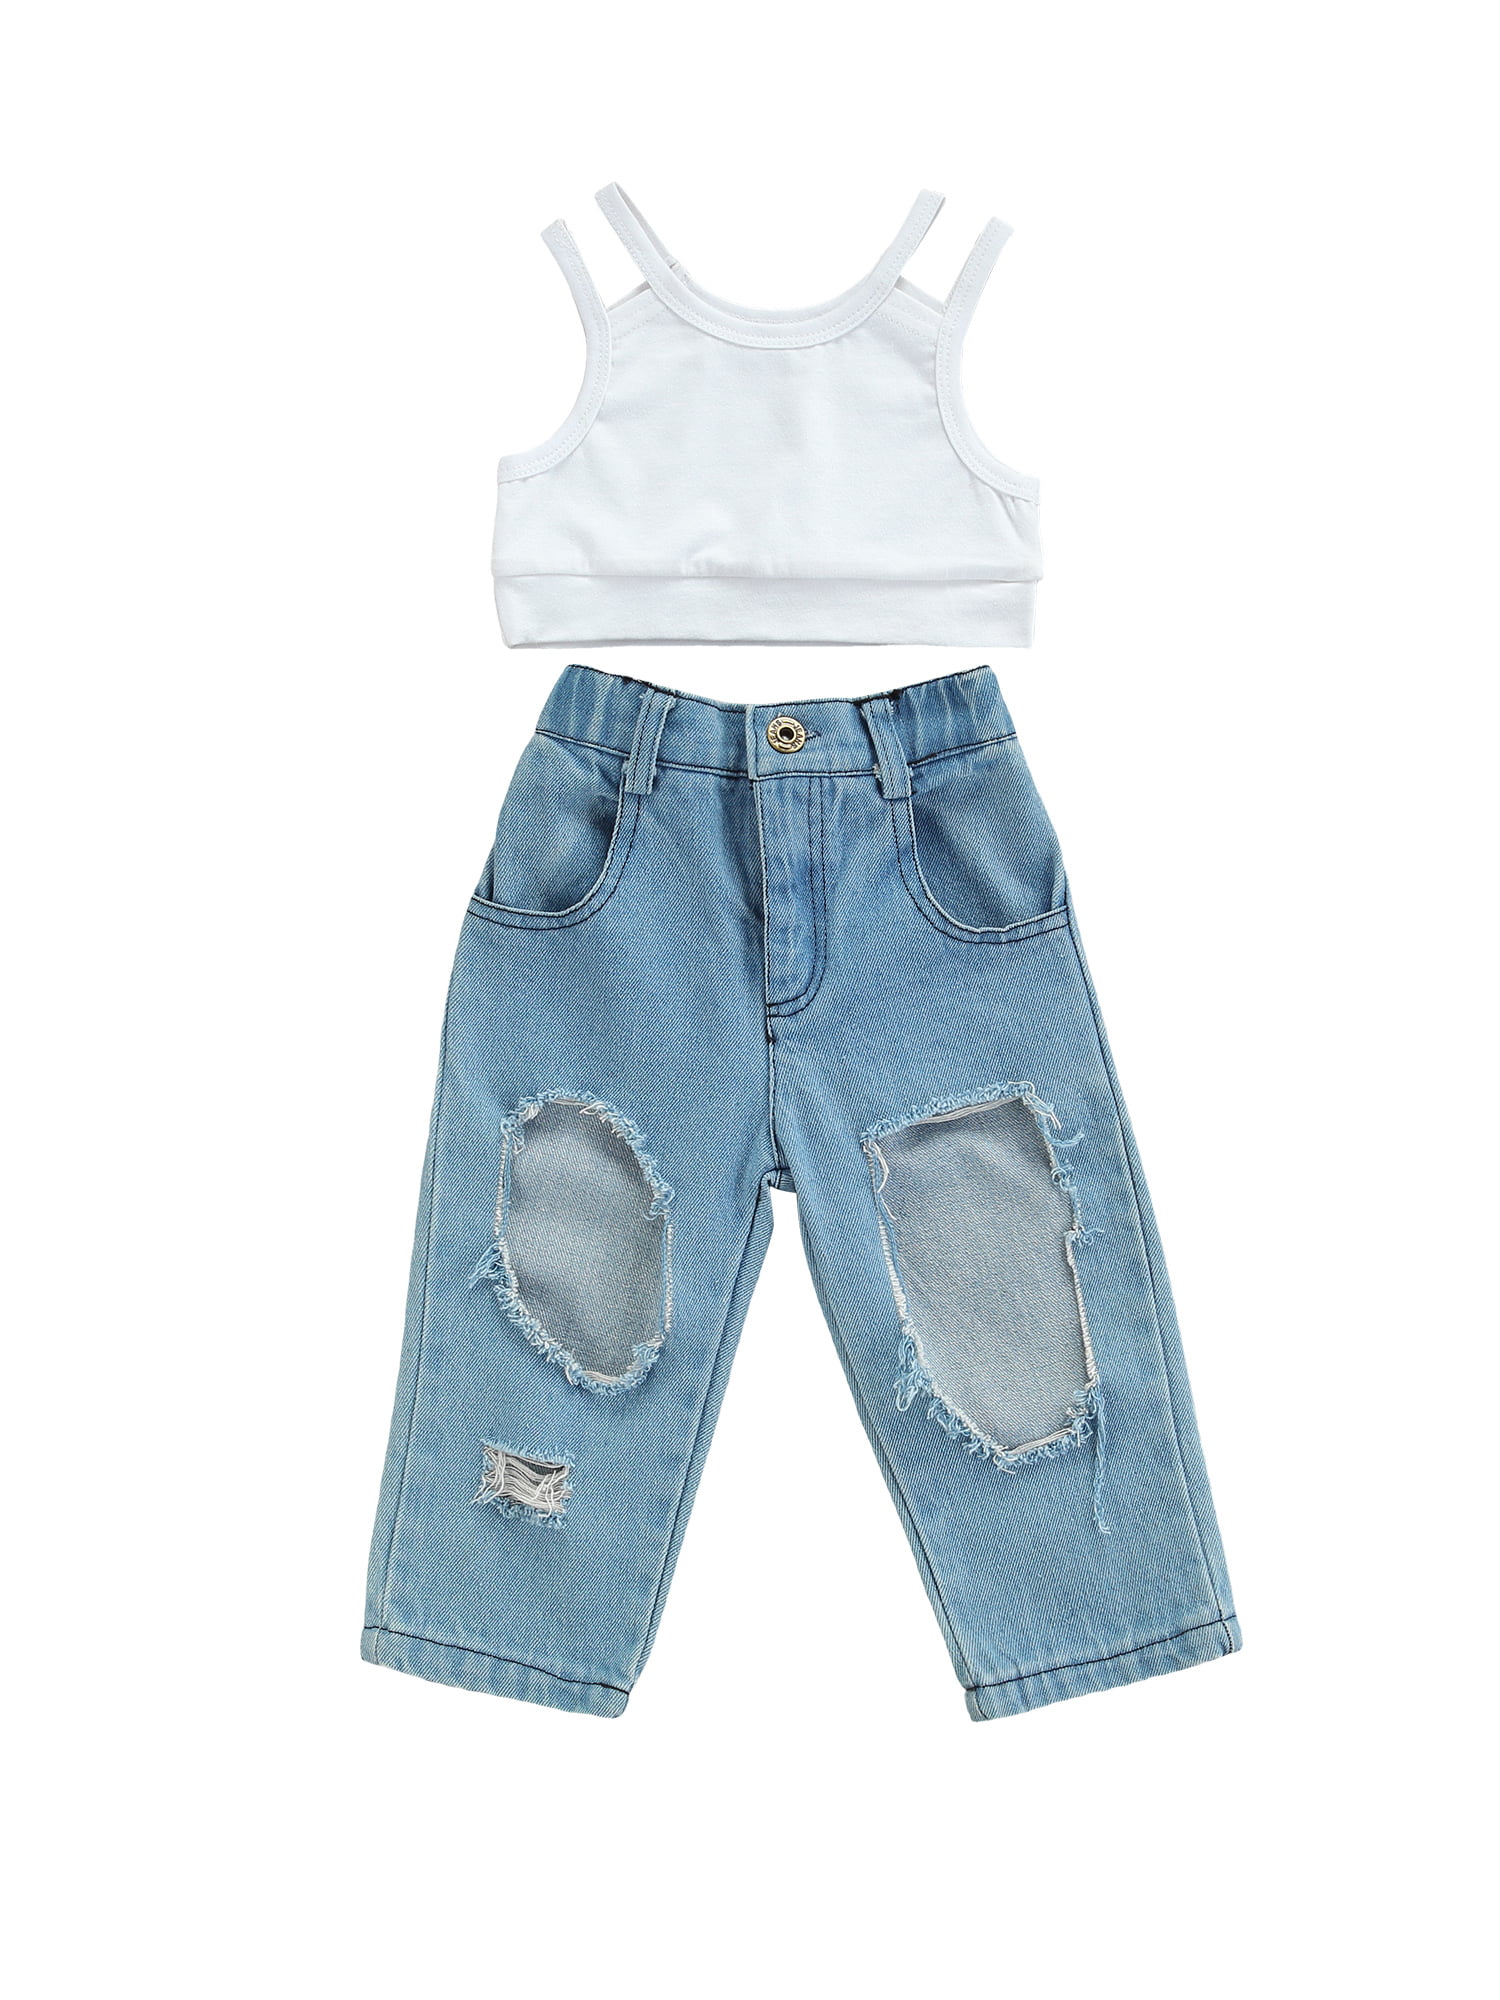 Details about   New Girl Boy Unisex Infant 10-12 Month Gray Light Washed Out Jeans Holes Style